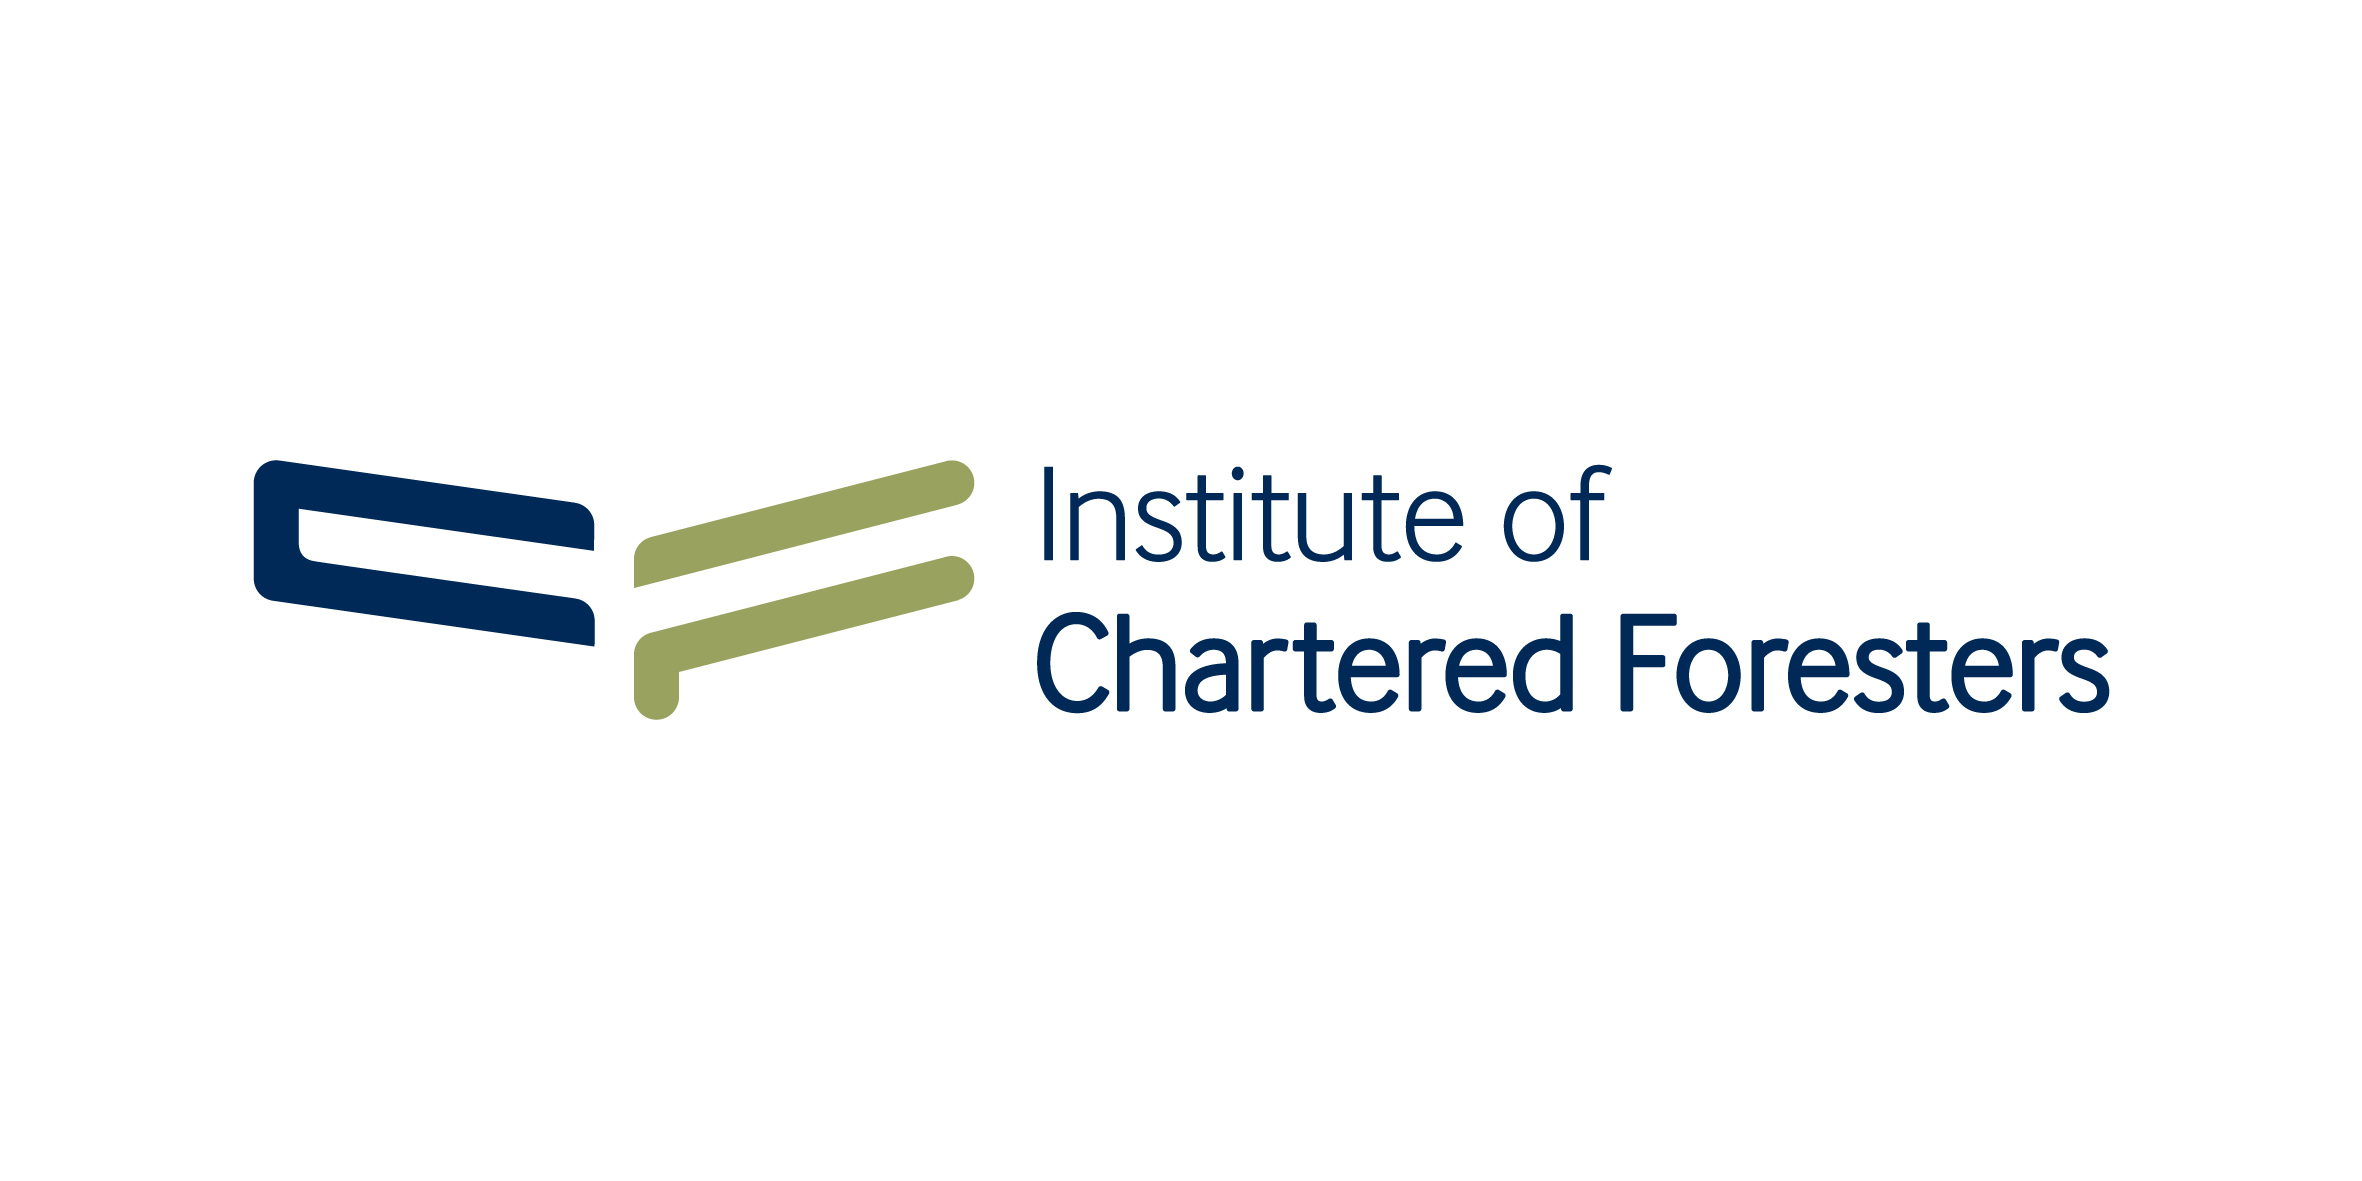 Institute of Chartered Foresters